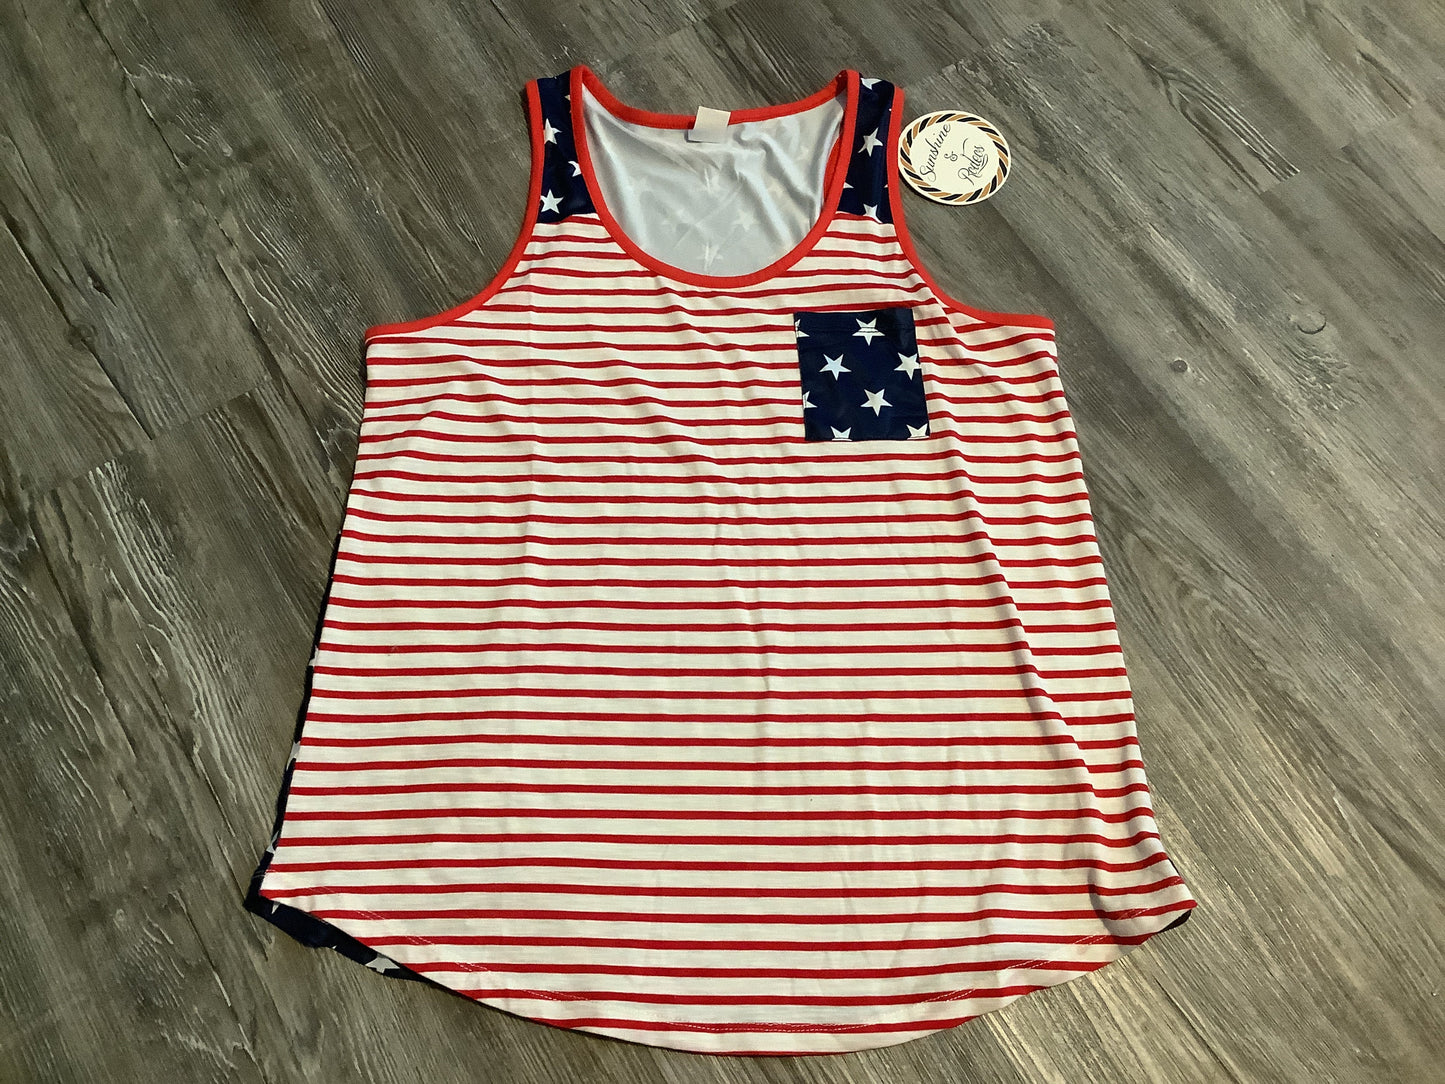 Flag Top Sleeveless Basic Clothes Mentor, Size M